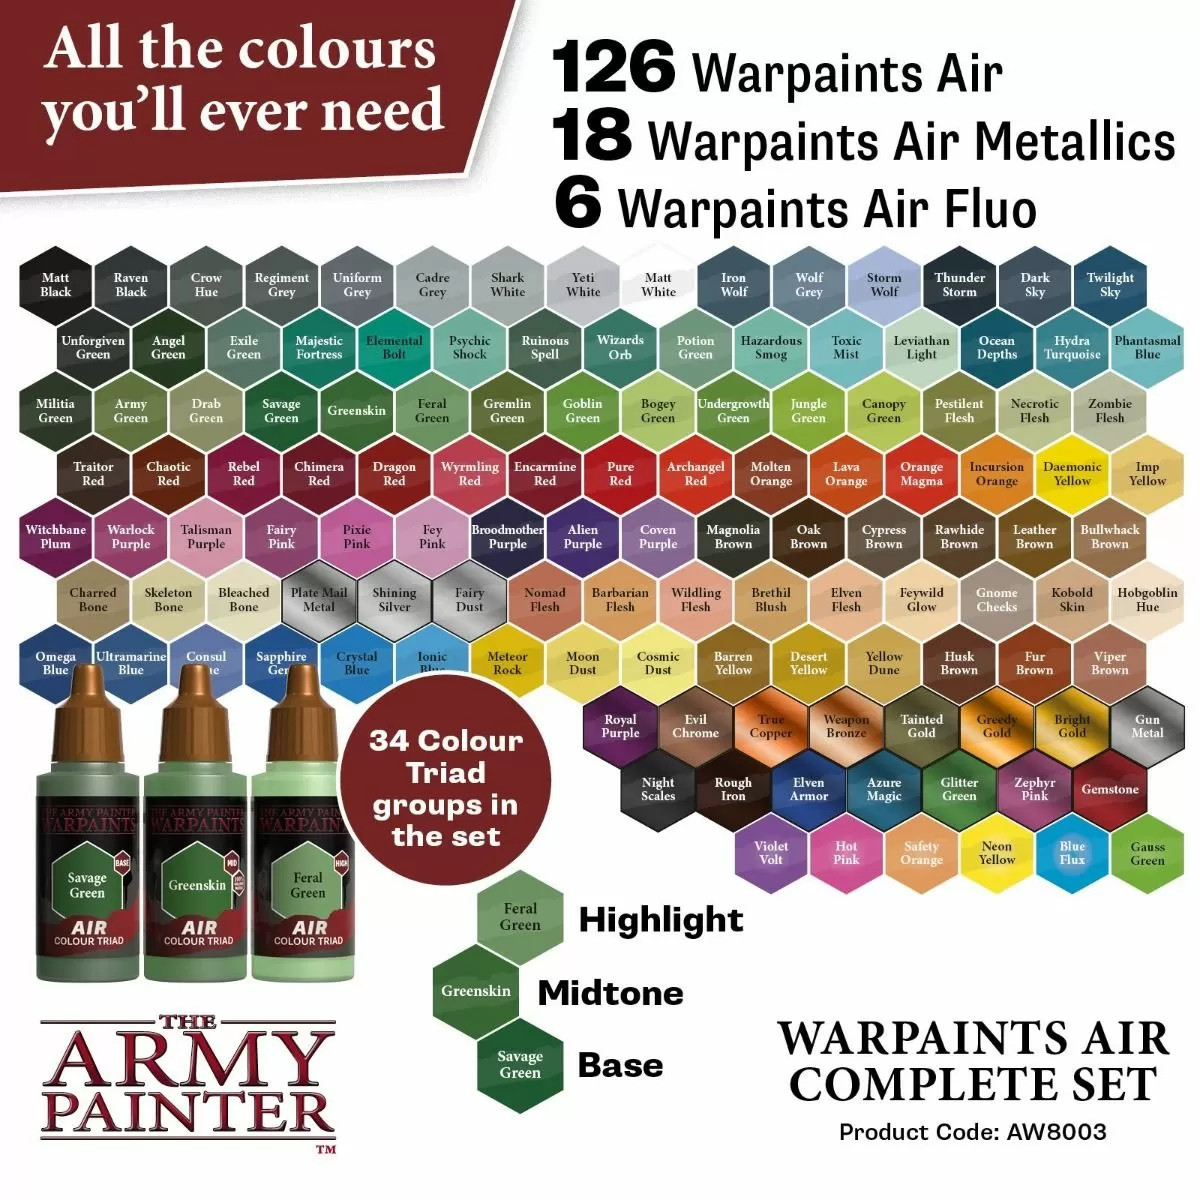  The Army Painter Warpaints Hobby Set -Model Kit Tools for  Miniatures Includes 3 Hobby Brushes, 10 Miniature Paints, Model Paints for  Plastic Models-Beginners Model Building Kits, Model Kit Accessories : Arts